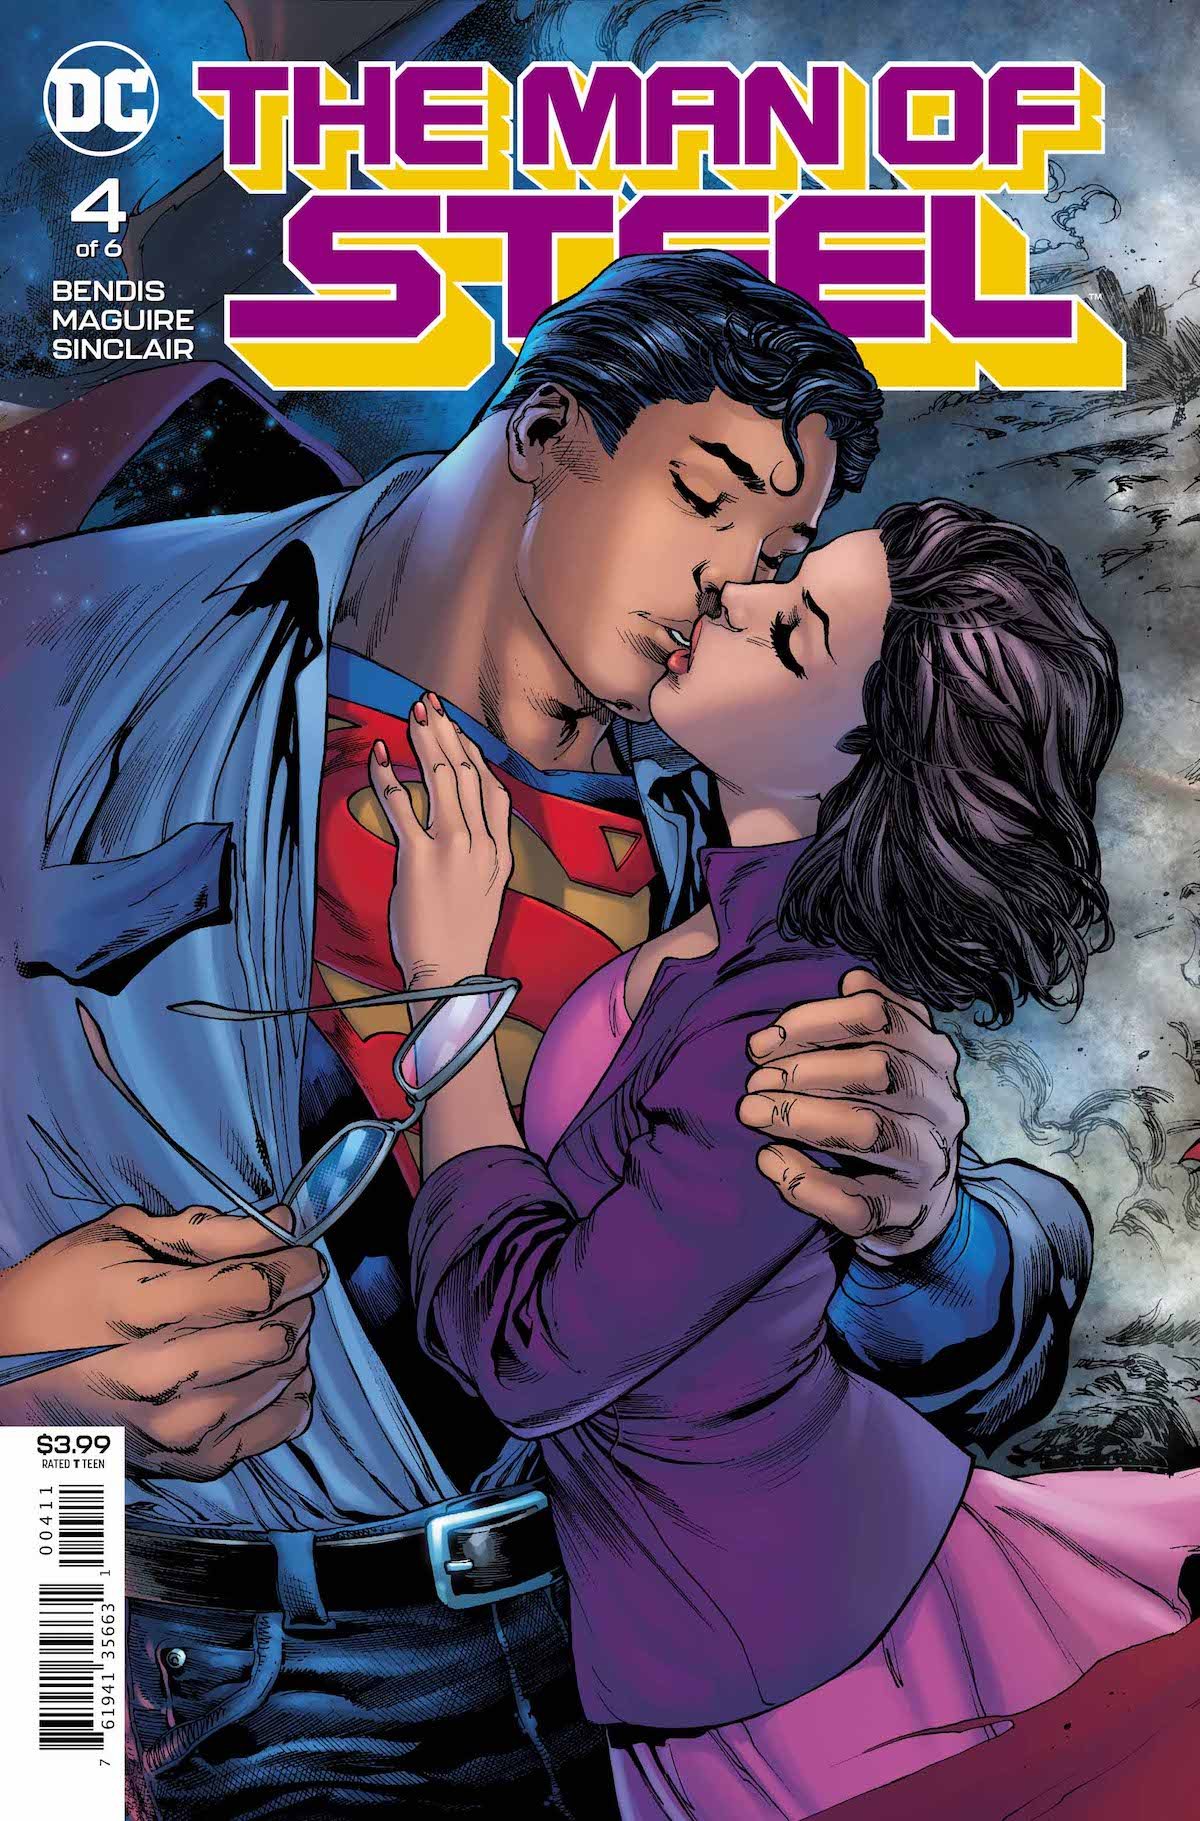 Man of Steel #4 cover